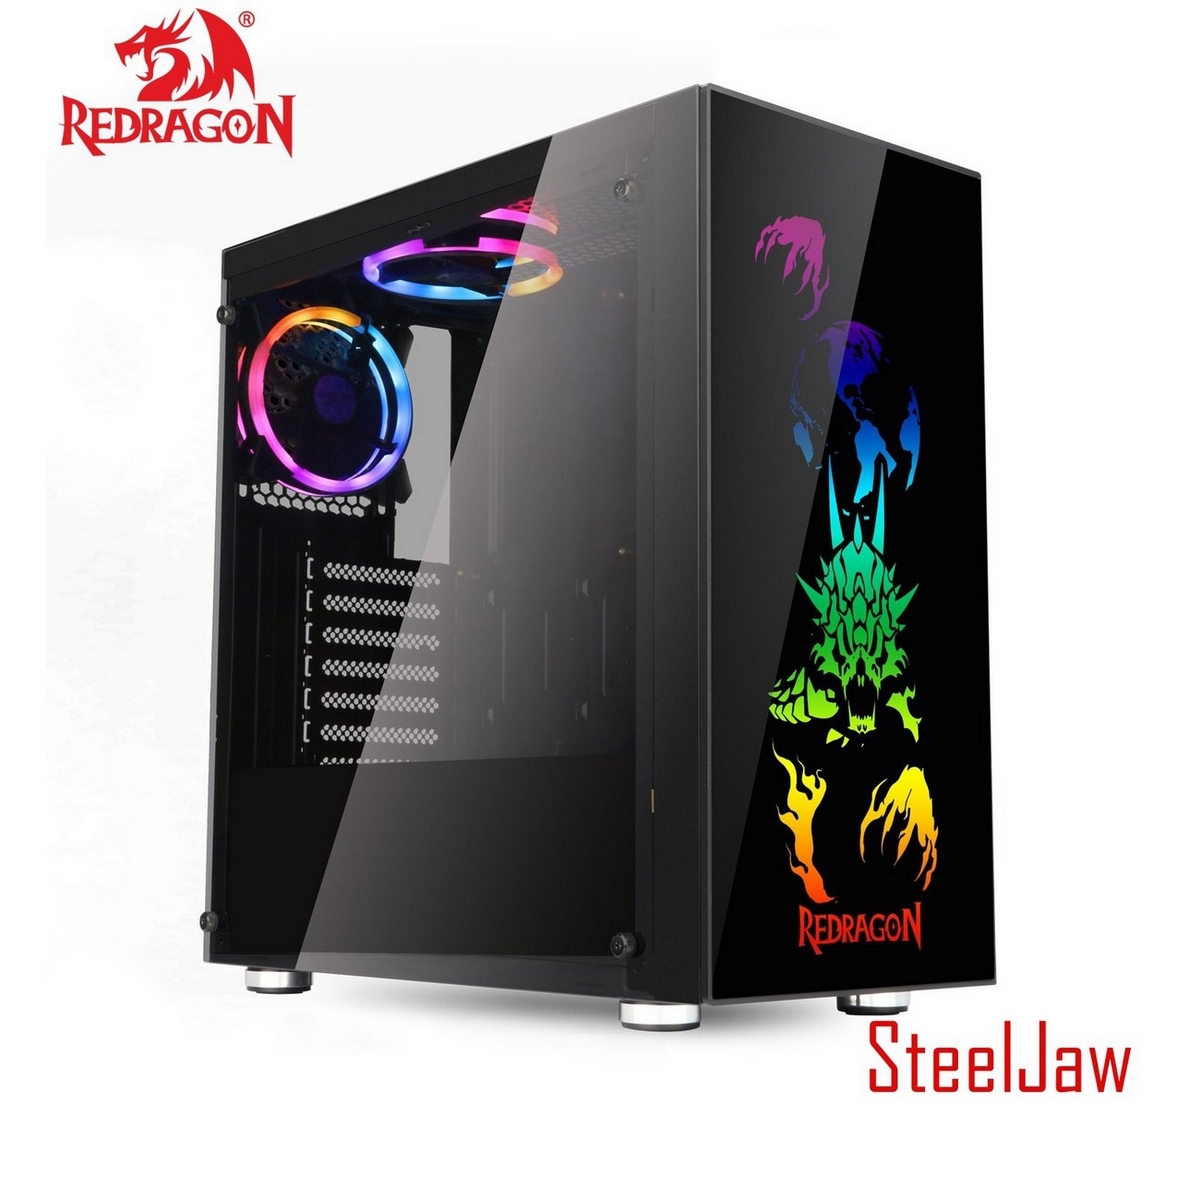 Redragon Steeljaw Gc-608 Tempered Glass Gaming Pc Case With Rgb Backlighting Sync Support Up To Atx Motherboards Usb 3.0